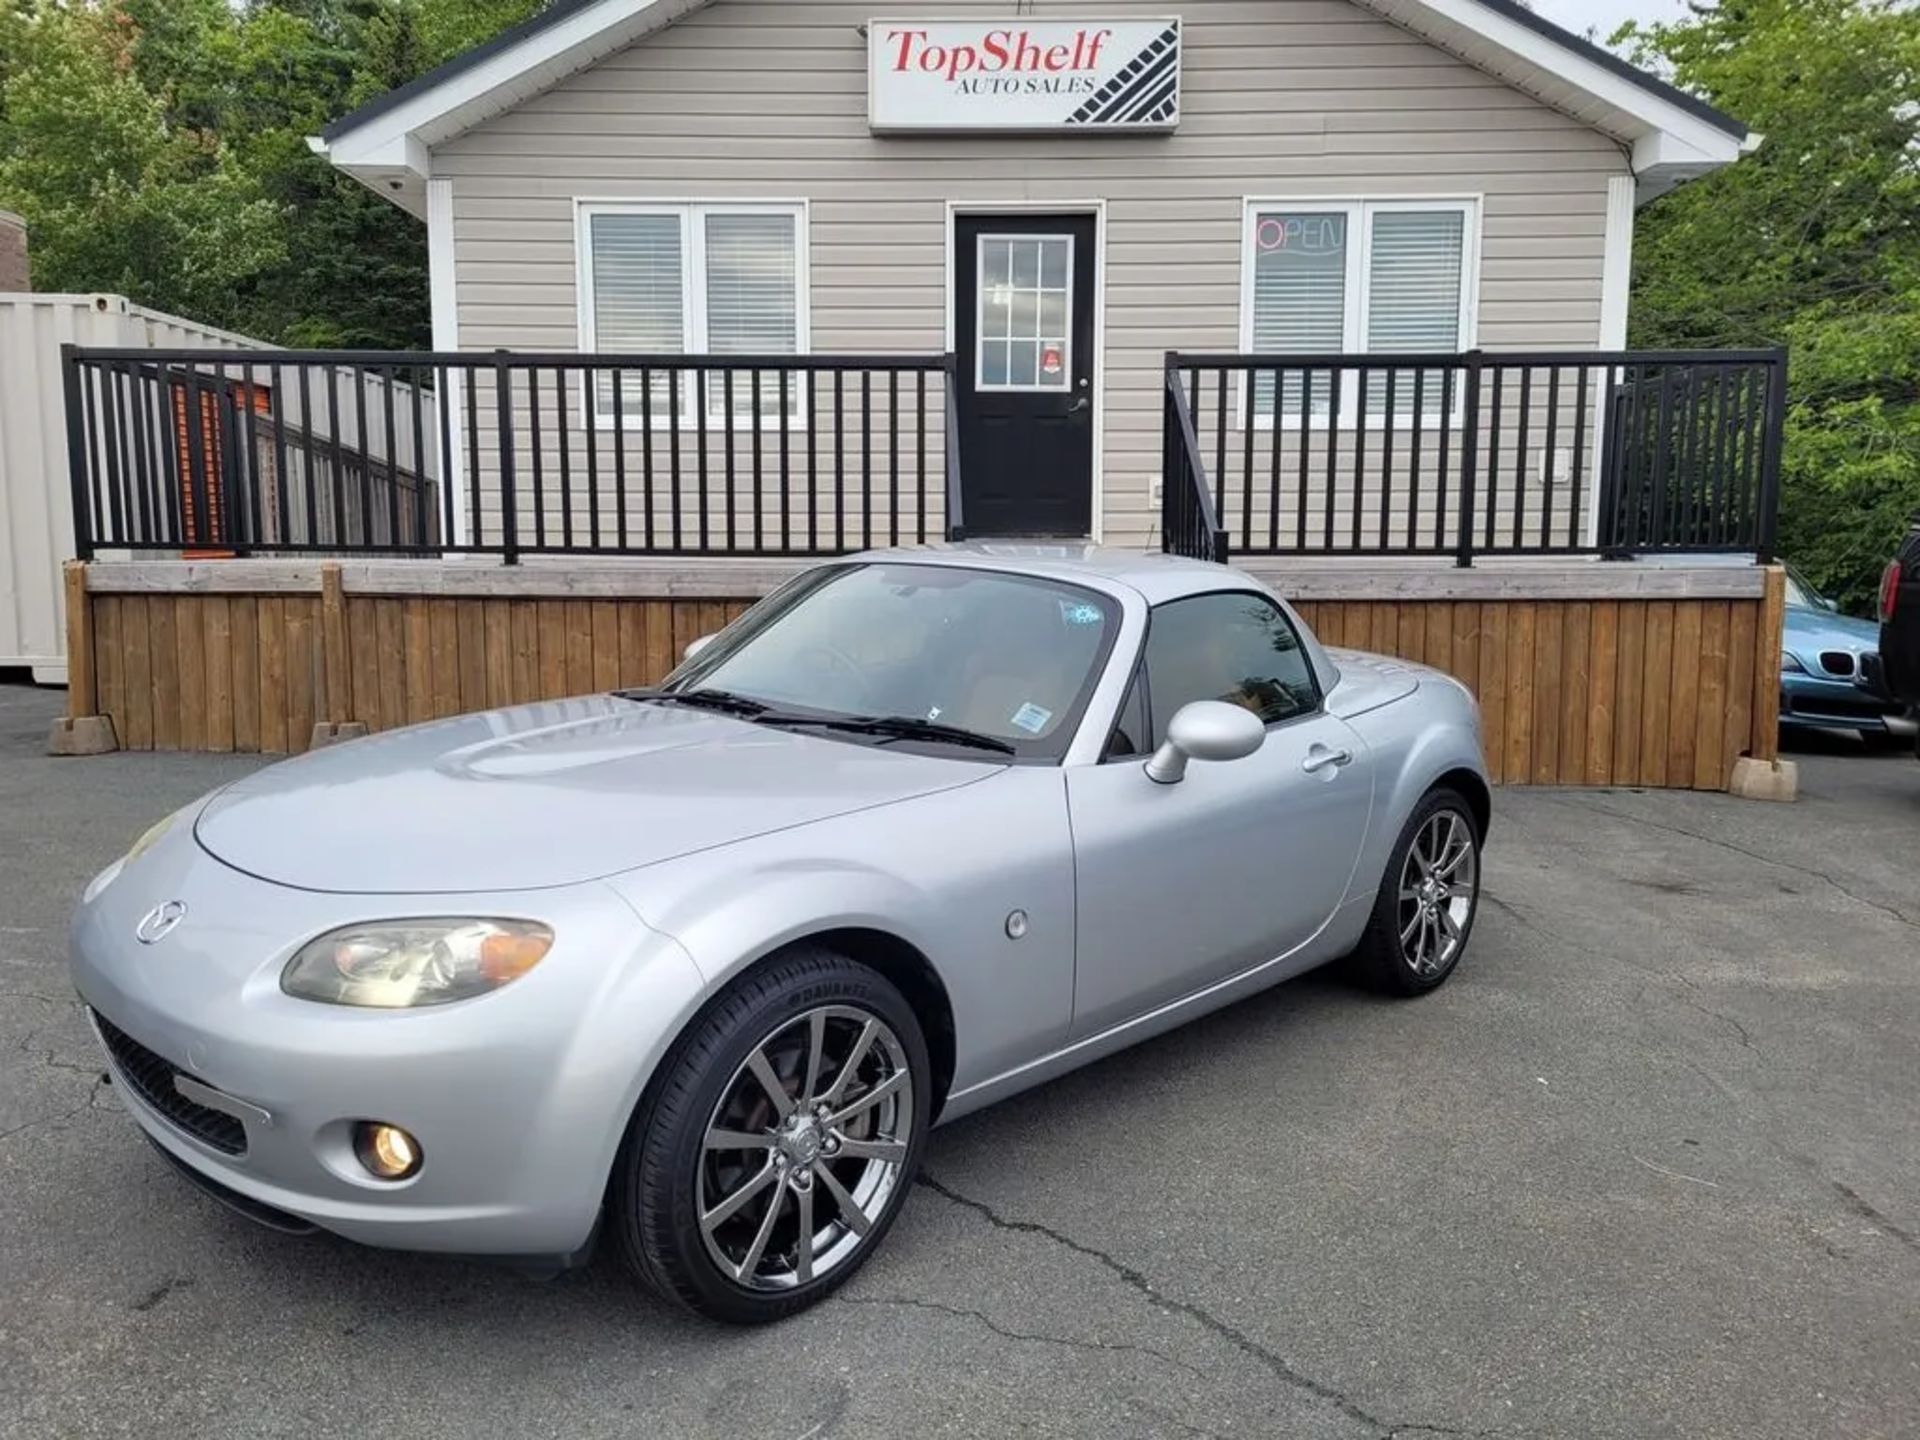 2007 Mazda MX-5 Roadster Freshly Imported From Tokyo Japan. - Image 16 of 20